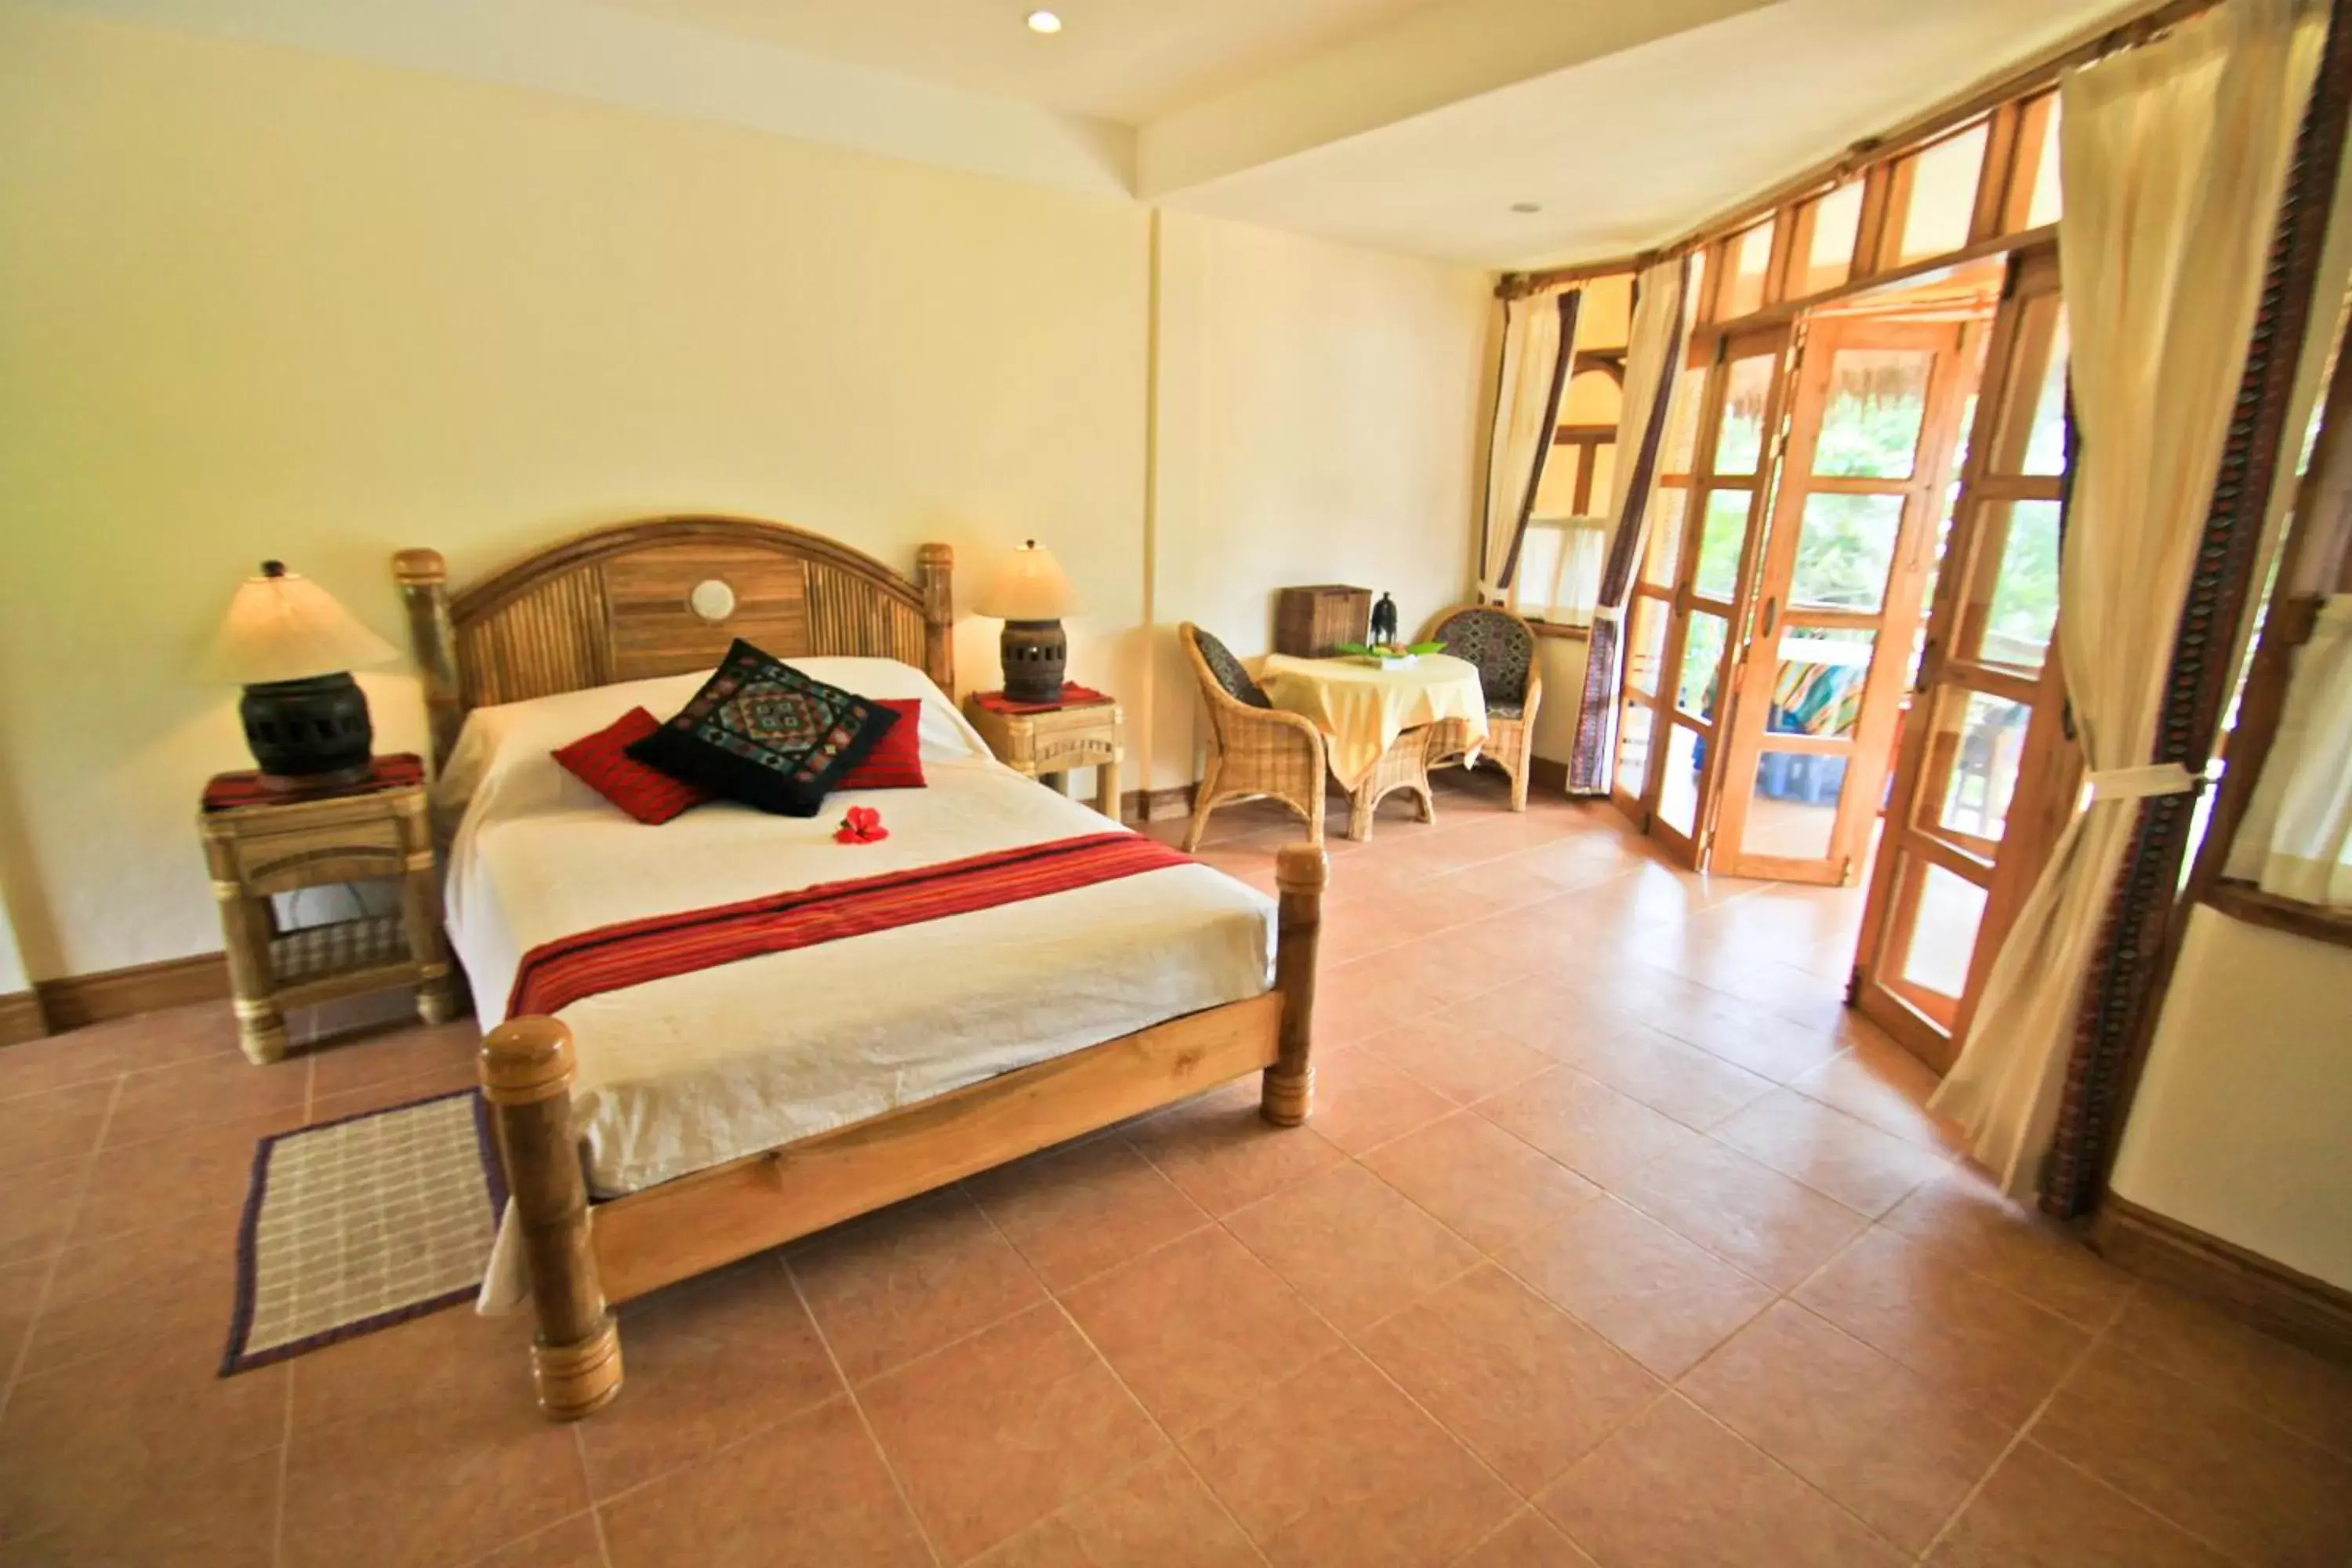 Photo of the whole room in Coco Grove Beach Resort, Siquijor Island